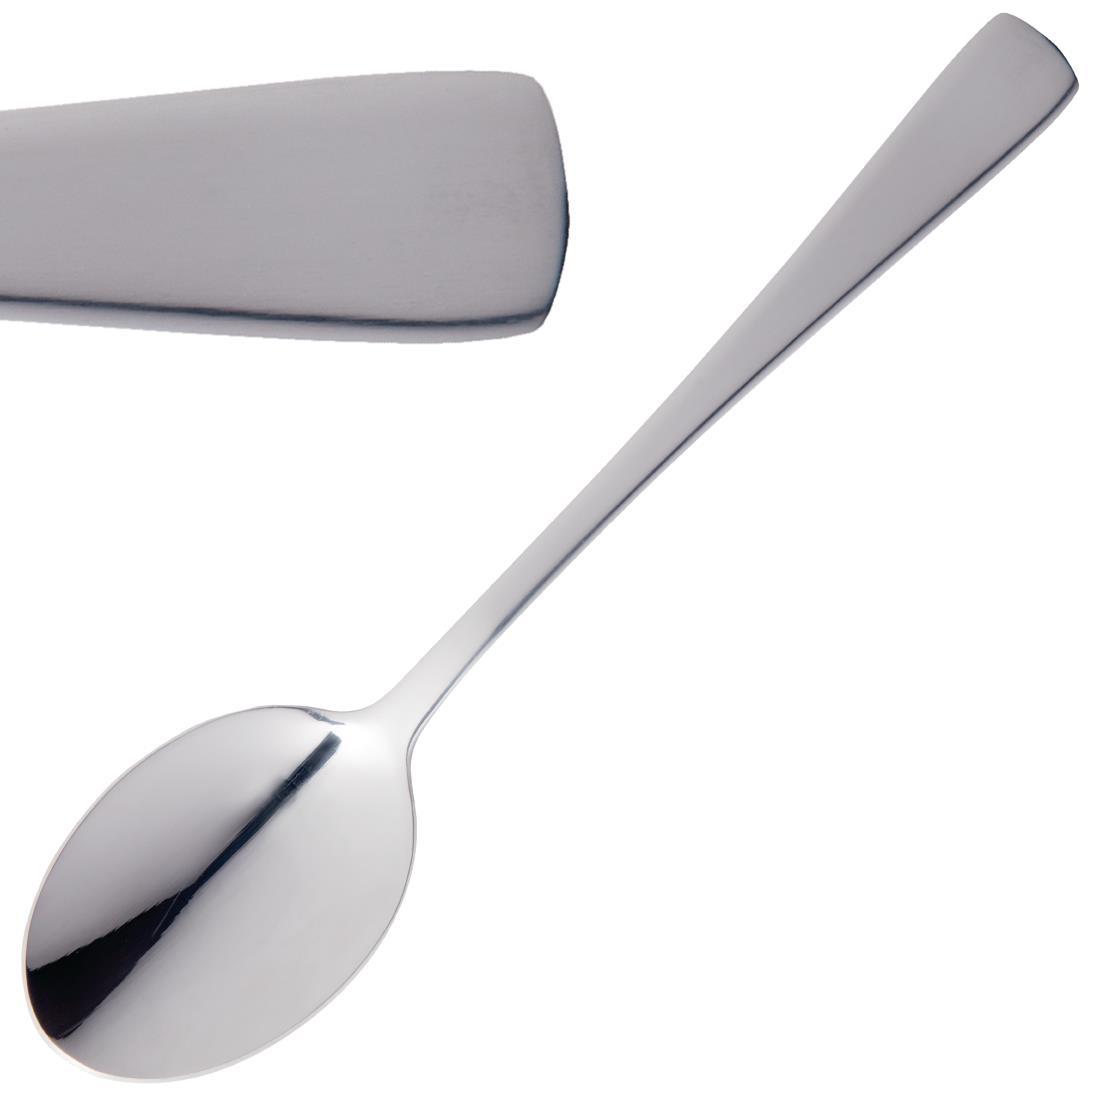 Olympia Clifton Dessert Spoon (Pack of 12) - C448  - 1